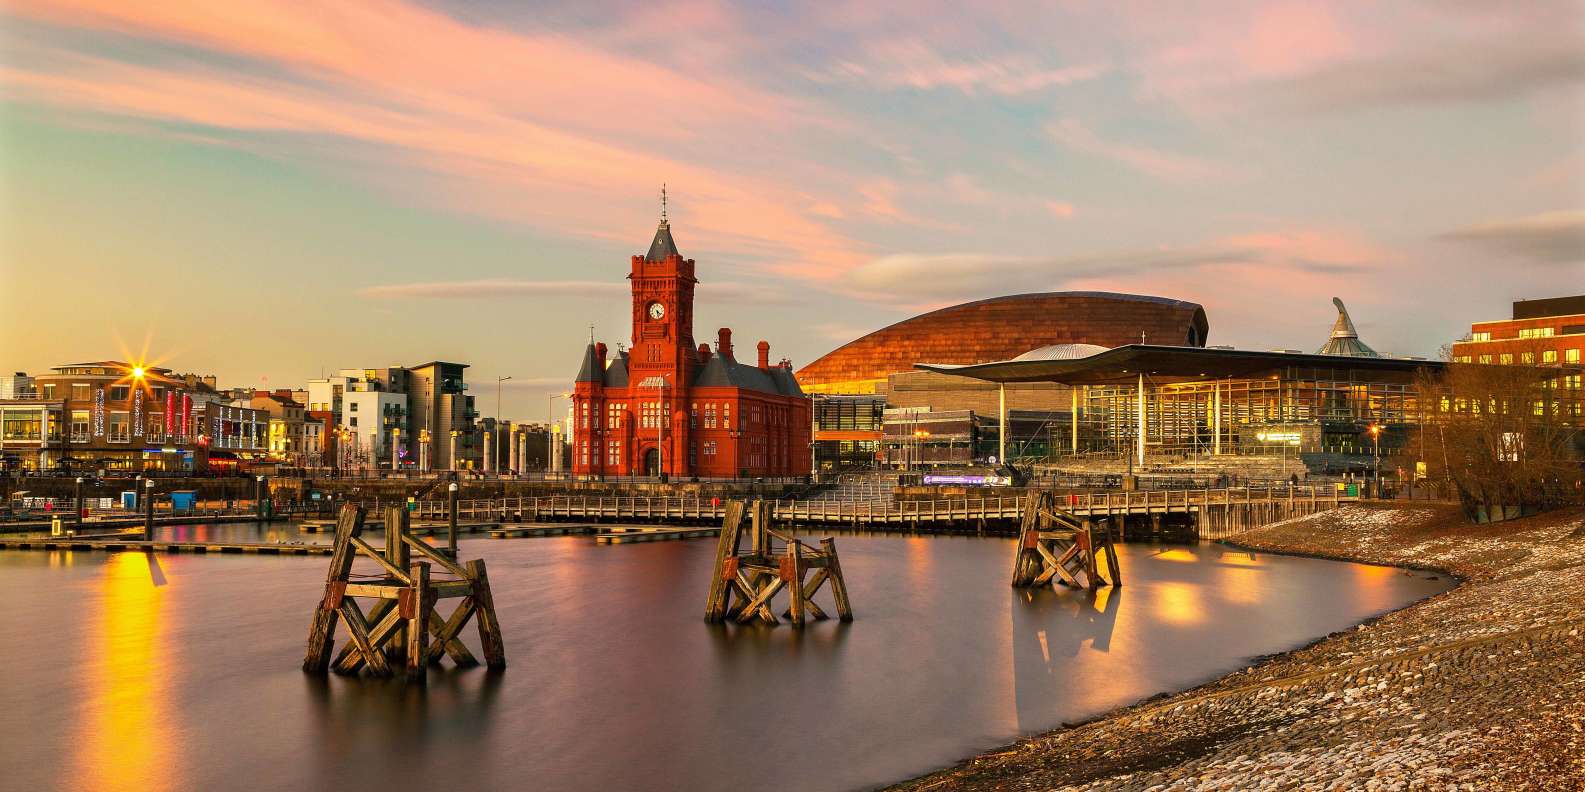 The BEST Cardiff Architecture 2023 - FREE Cancellation | GetYourGuide